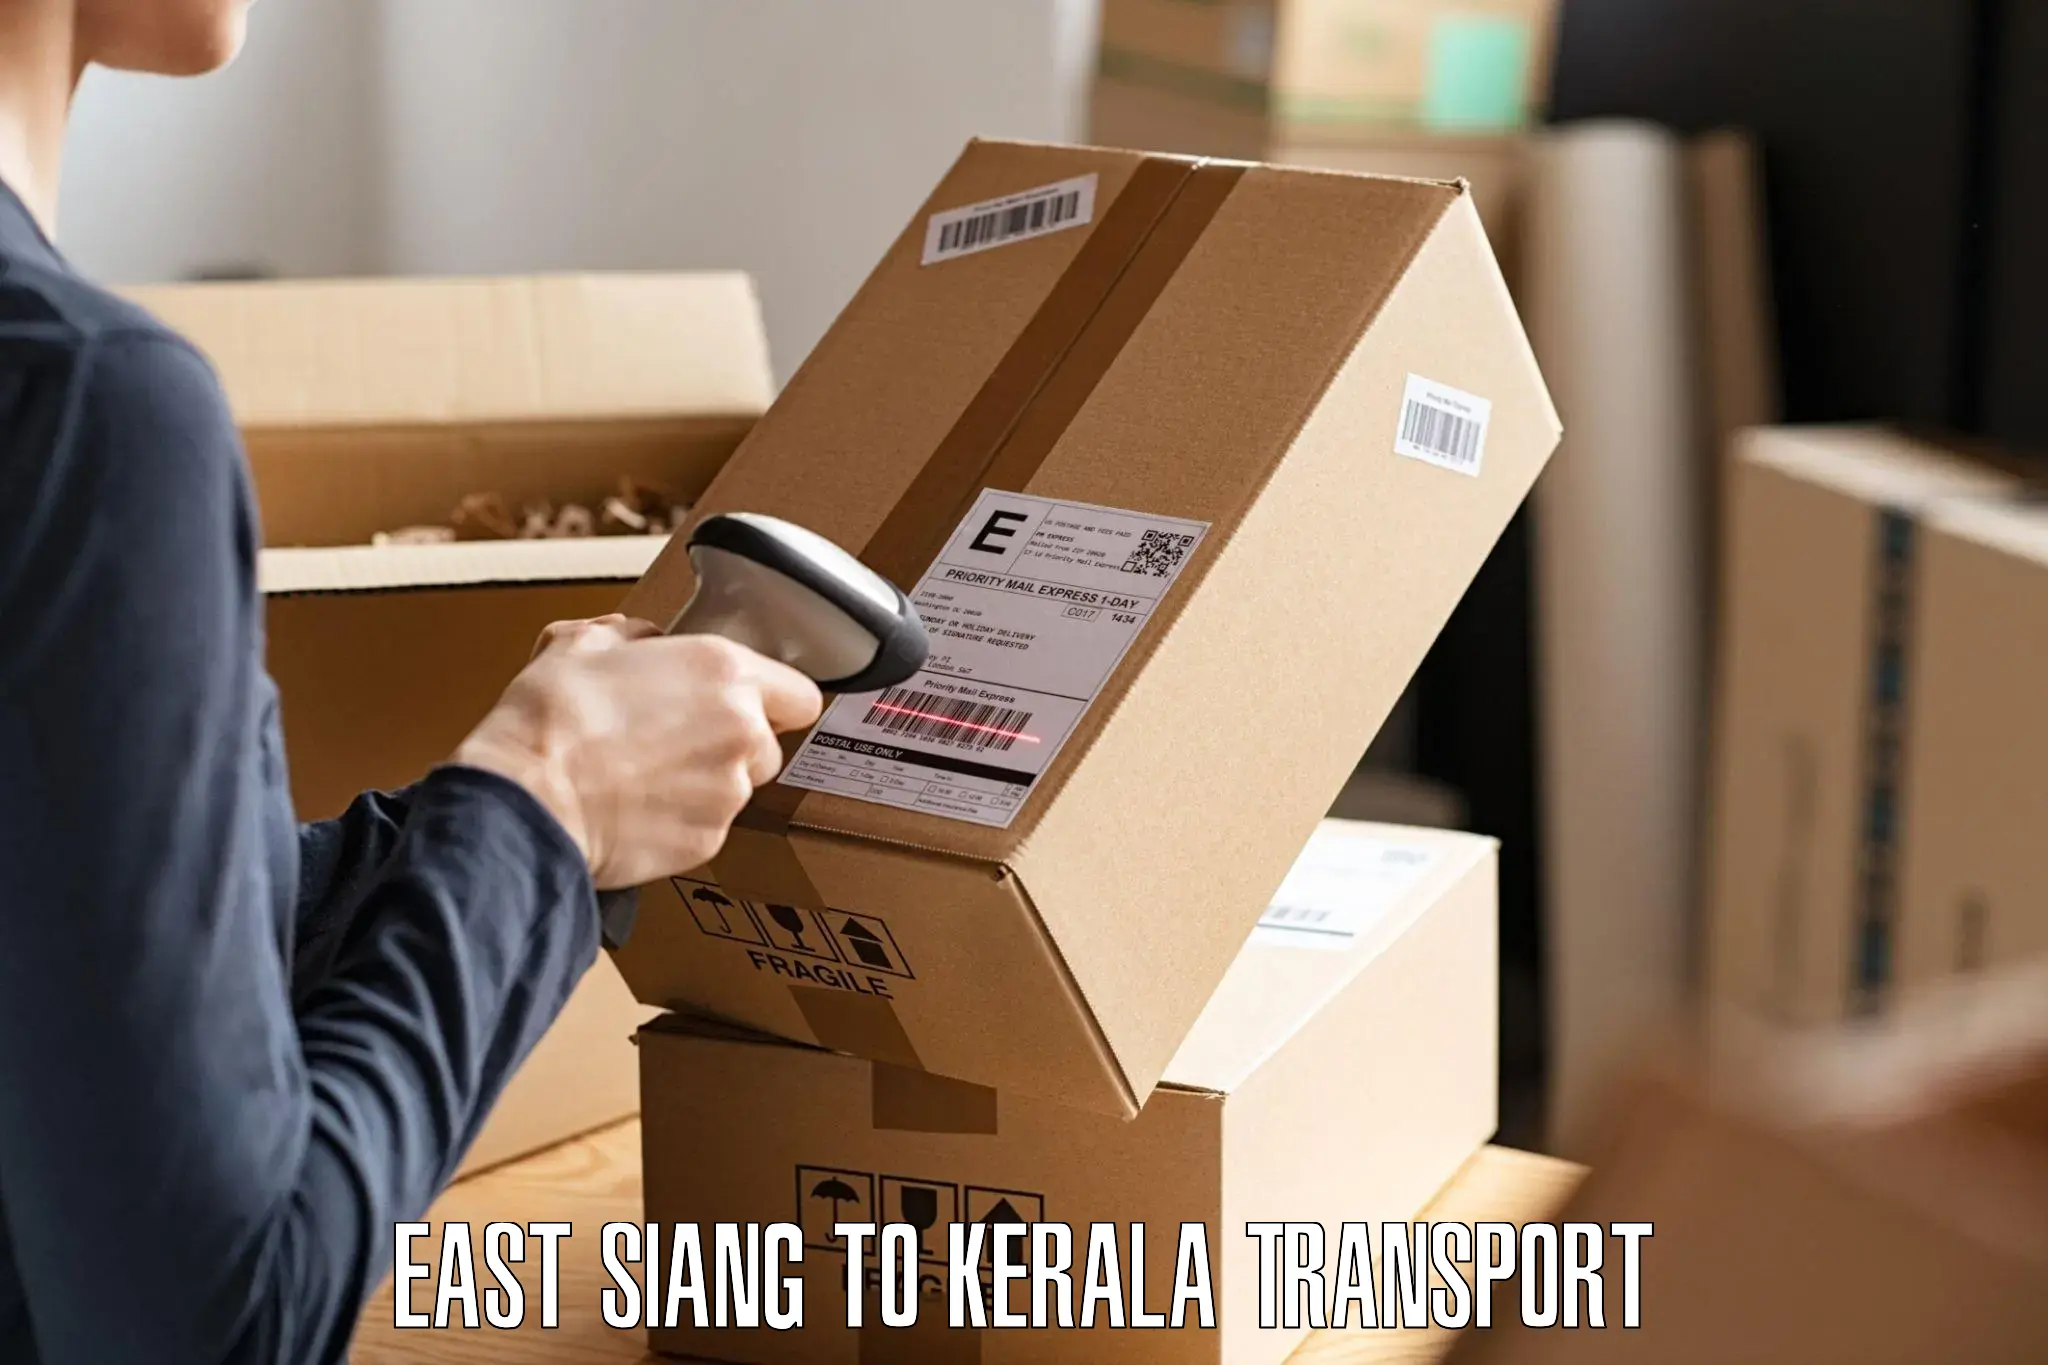 Transport shared services in East Siang to Ernakulam